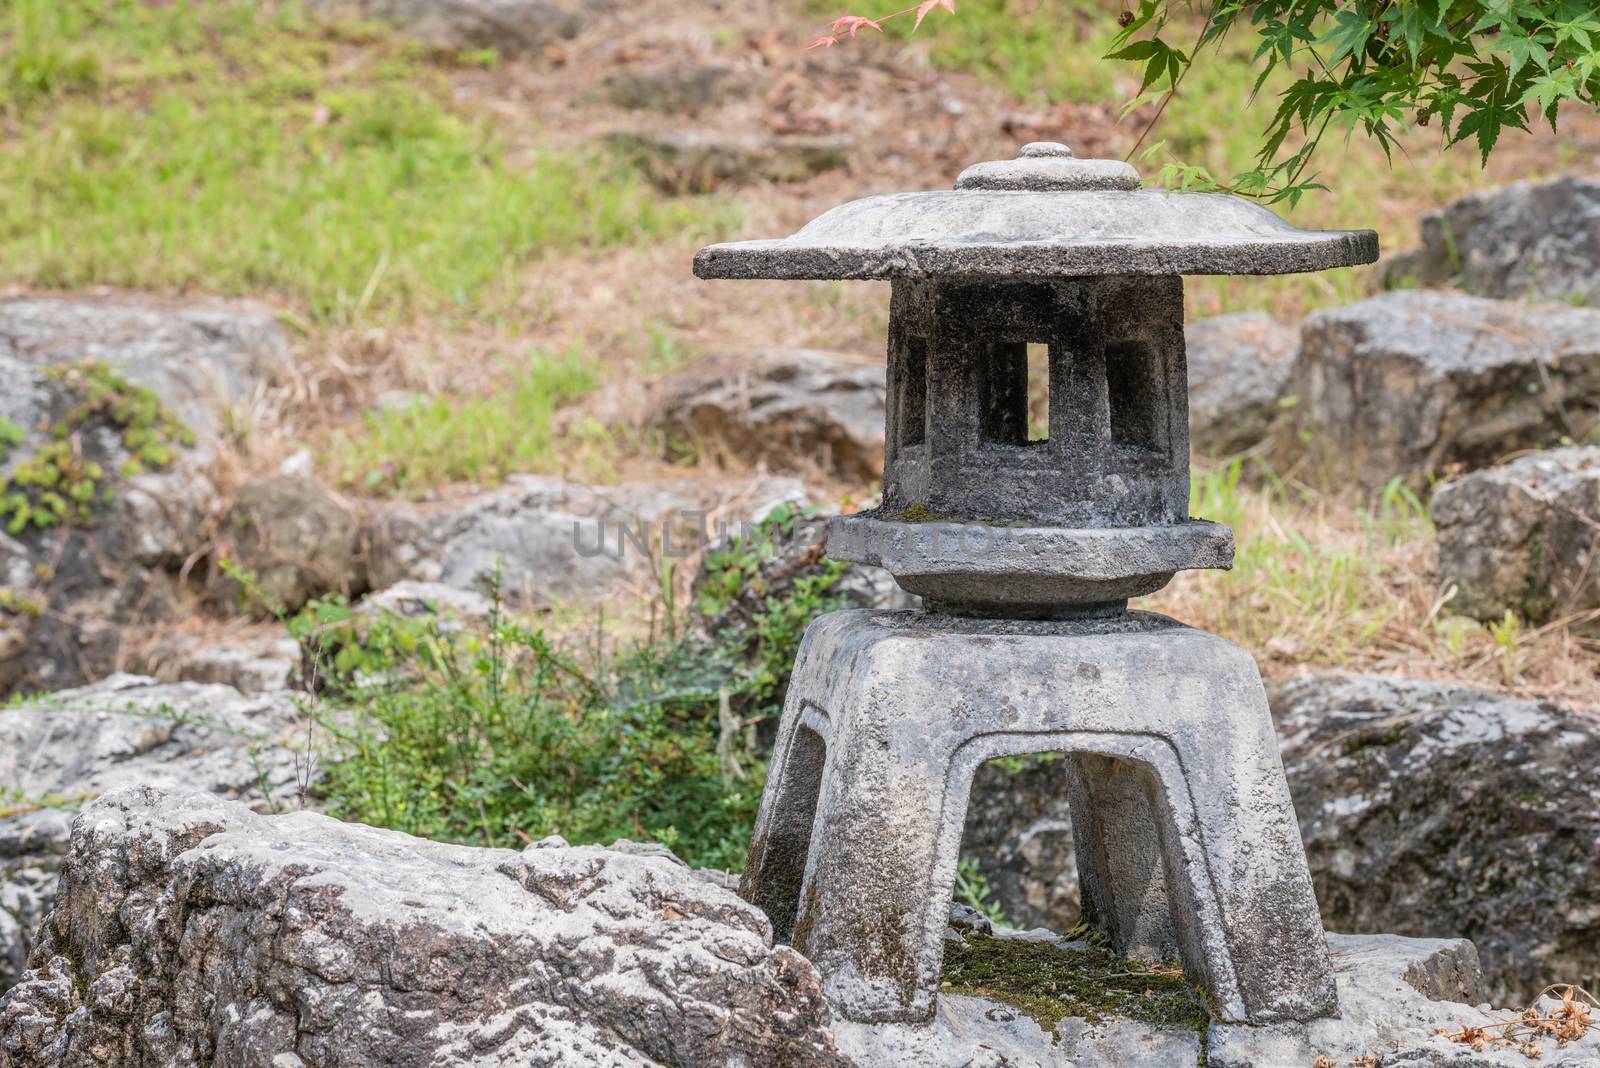 An old traditional Japanese stone lantern in a Japanese home garden.